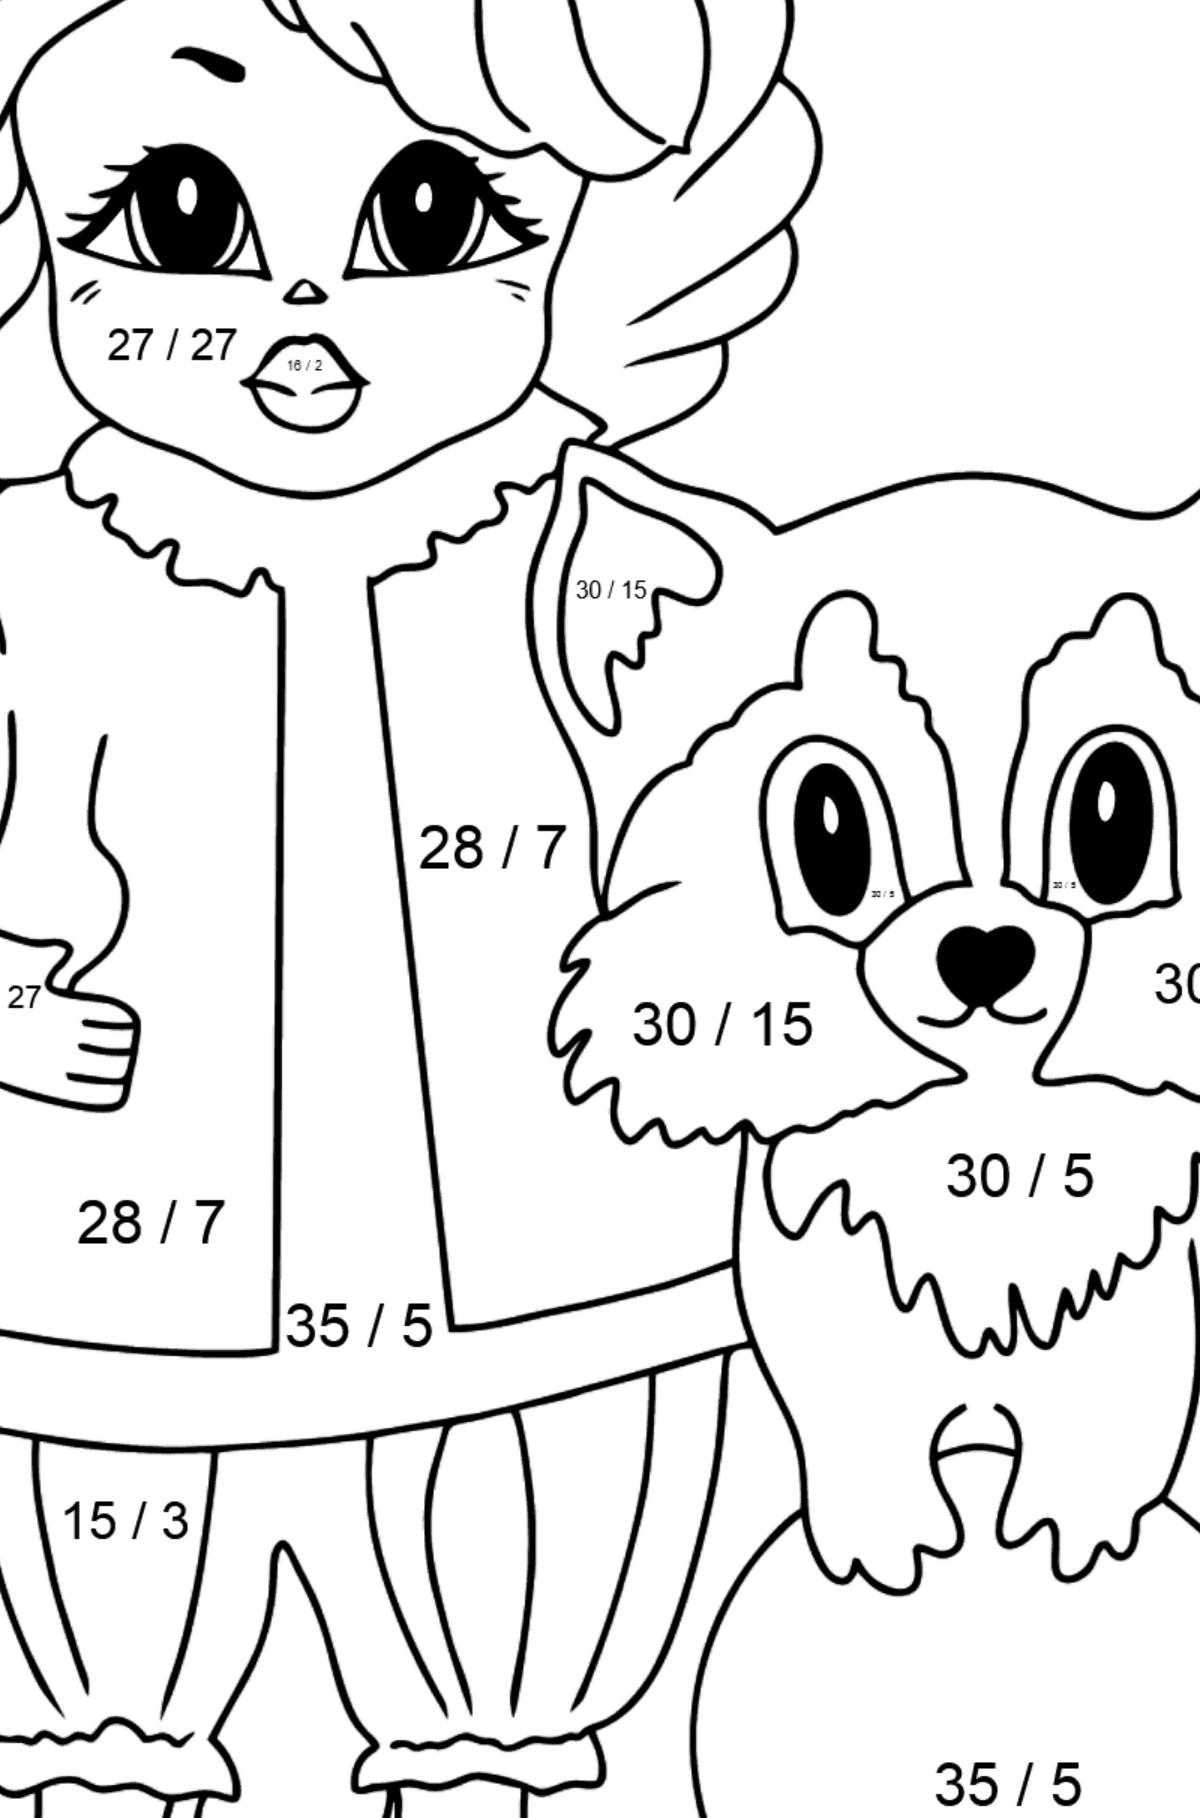 Coloring Picture - A Princess with a Cat and a Racoon - Math Coloring - Division for Kids